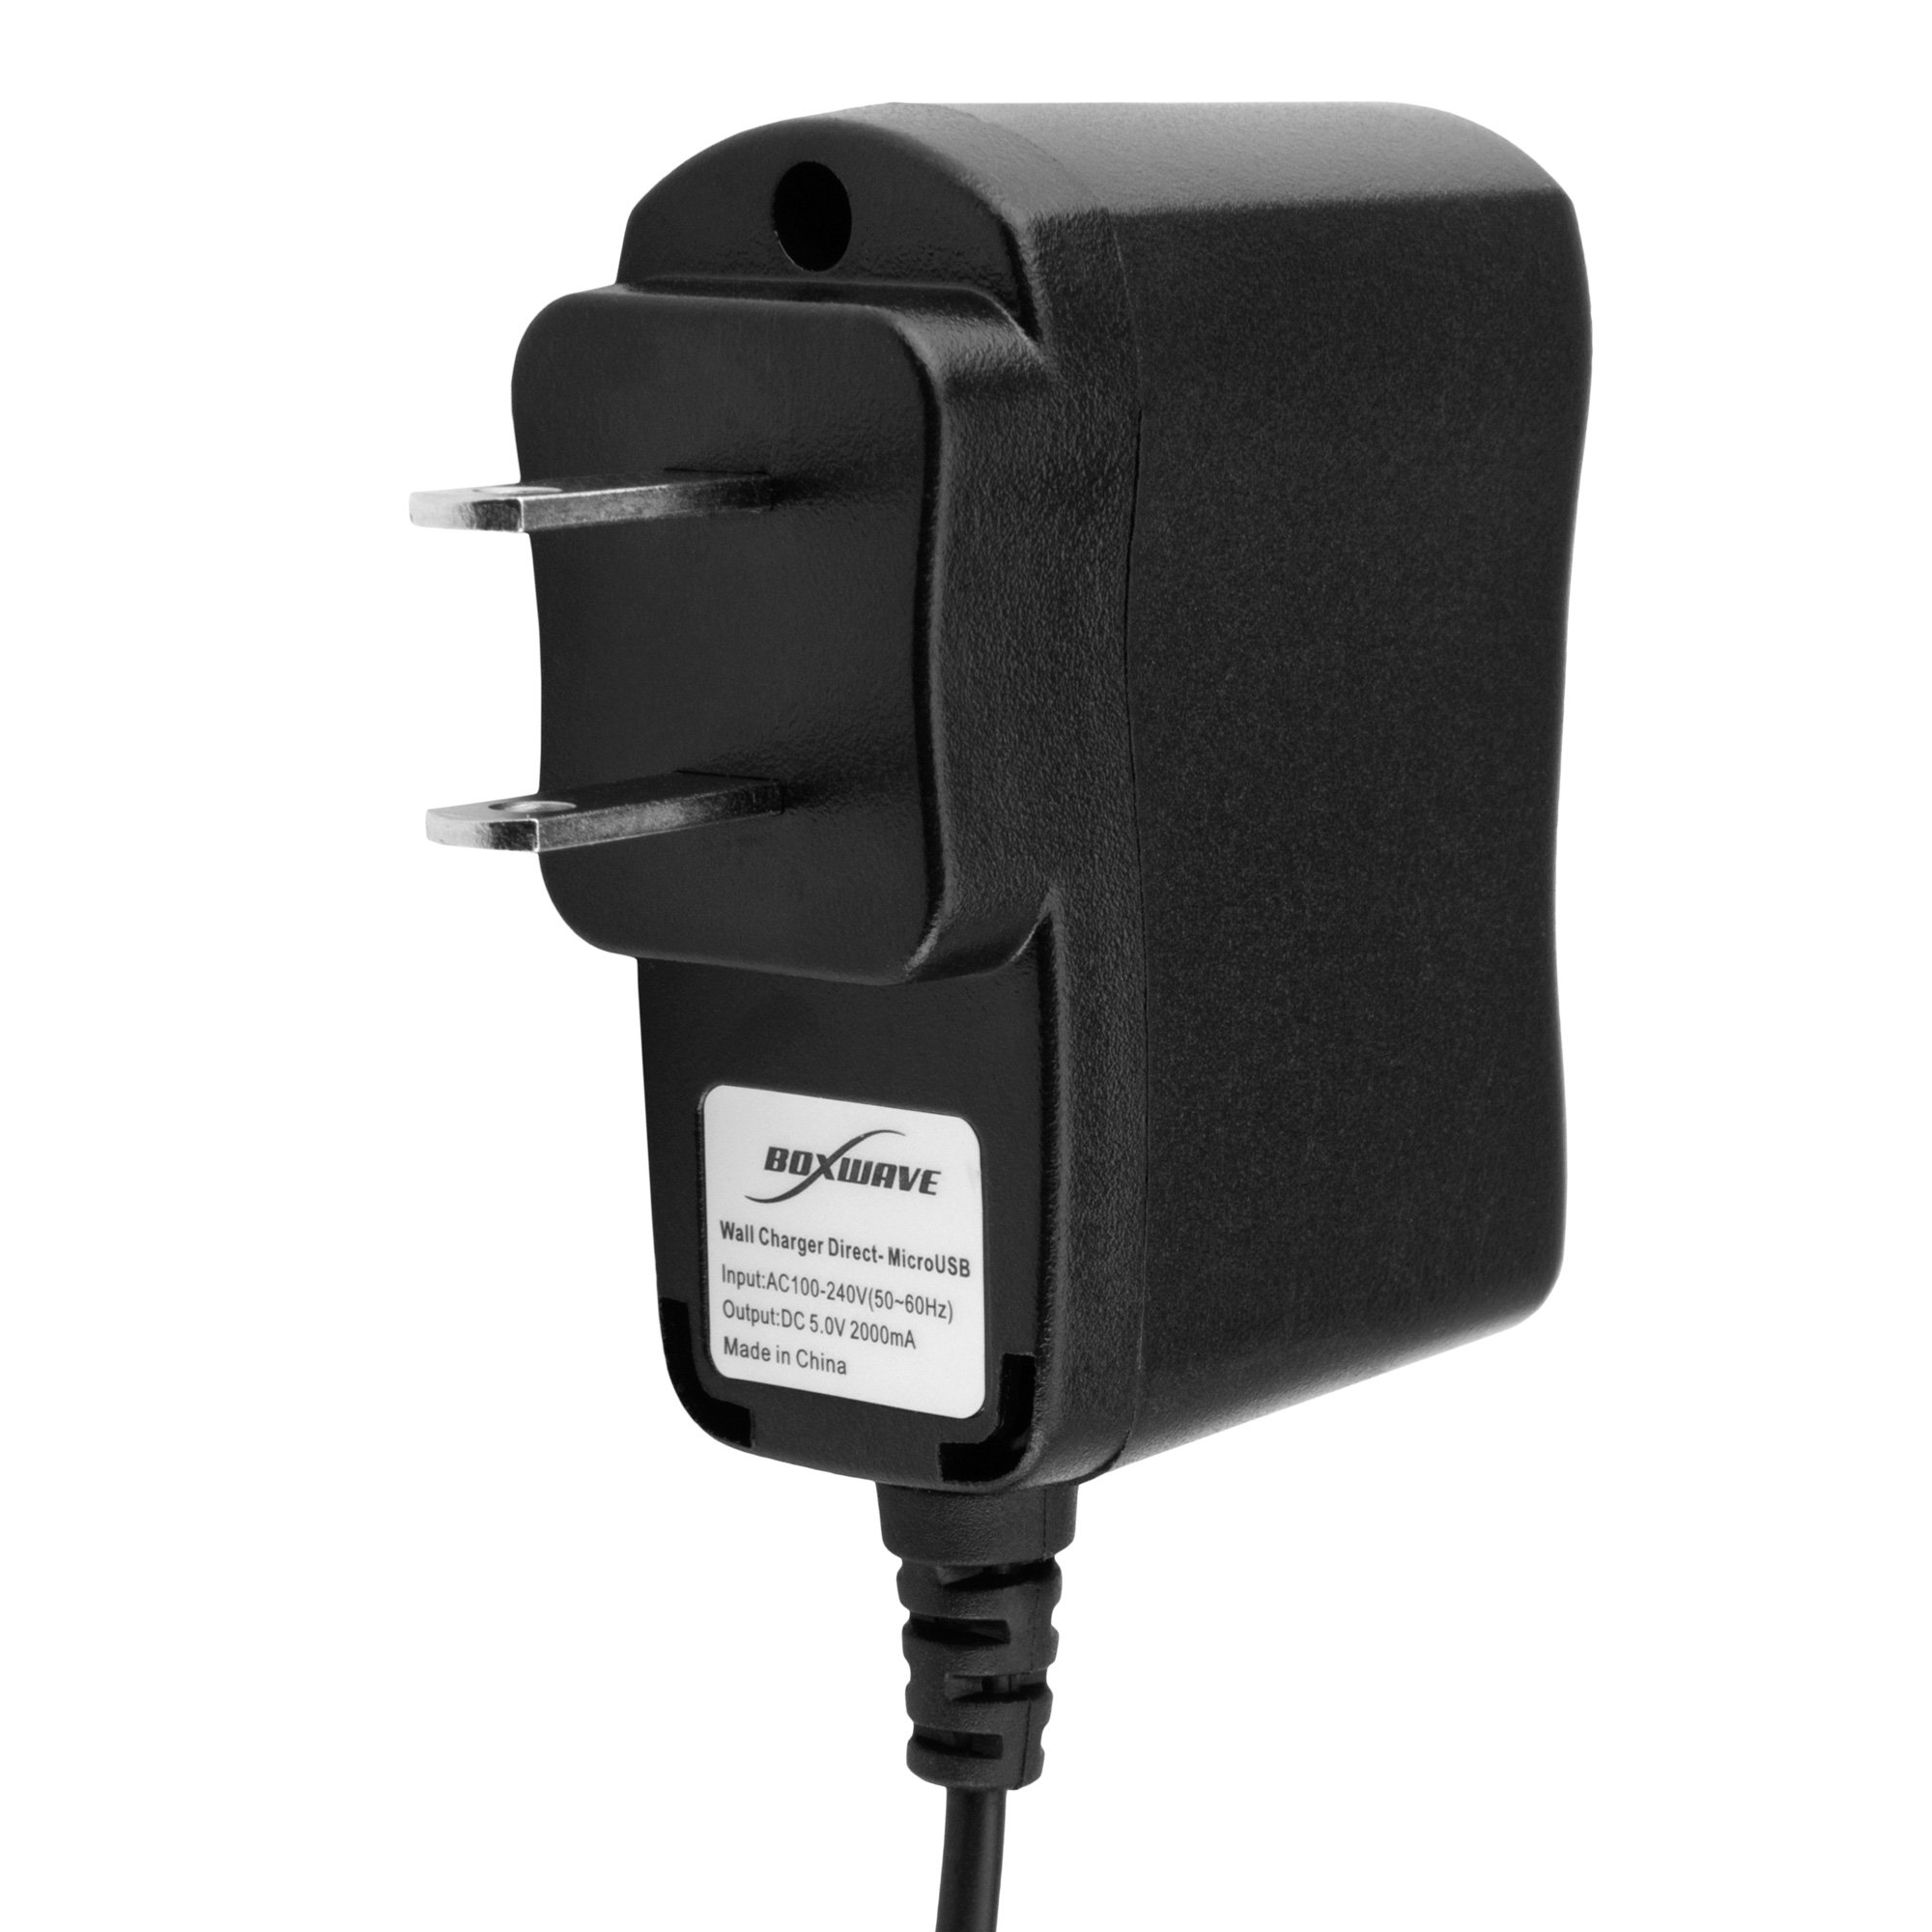 BoxWave Charger Compatible with Kodak Luma 150 Portable Wireless Projector (Charger by BoxWave) - Wall Charger Direct, Wall Plug Charger for Kodak Luma 150 Portable Wireless Projector